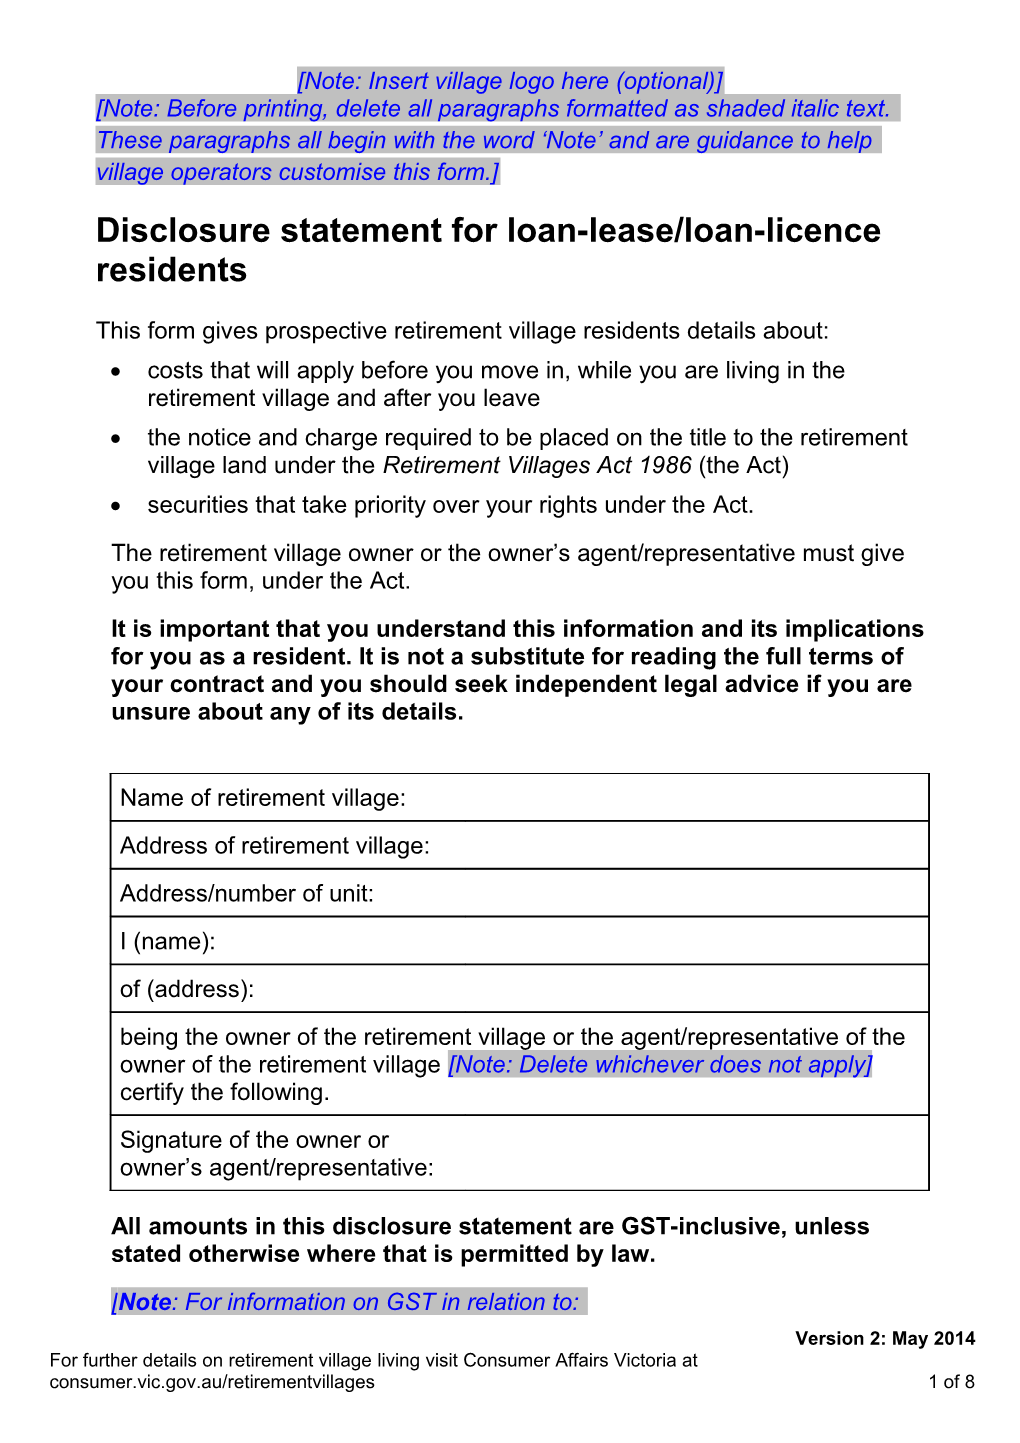 Disclosure Statement for Loan-Lease/Loan-Licence Residents